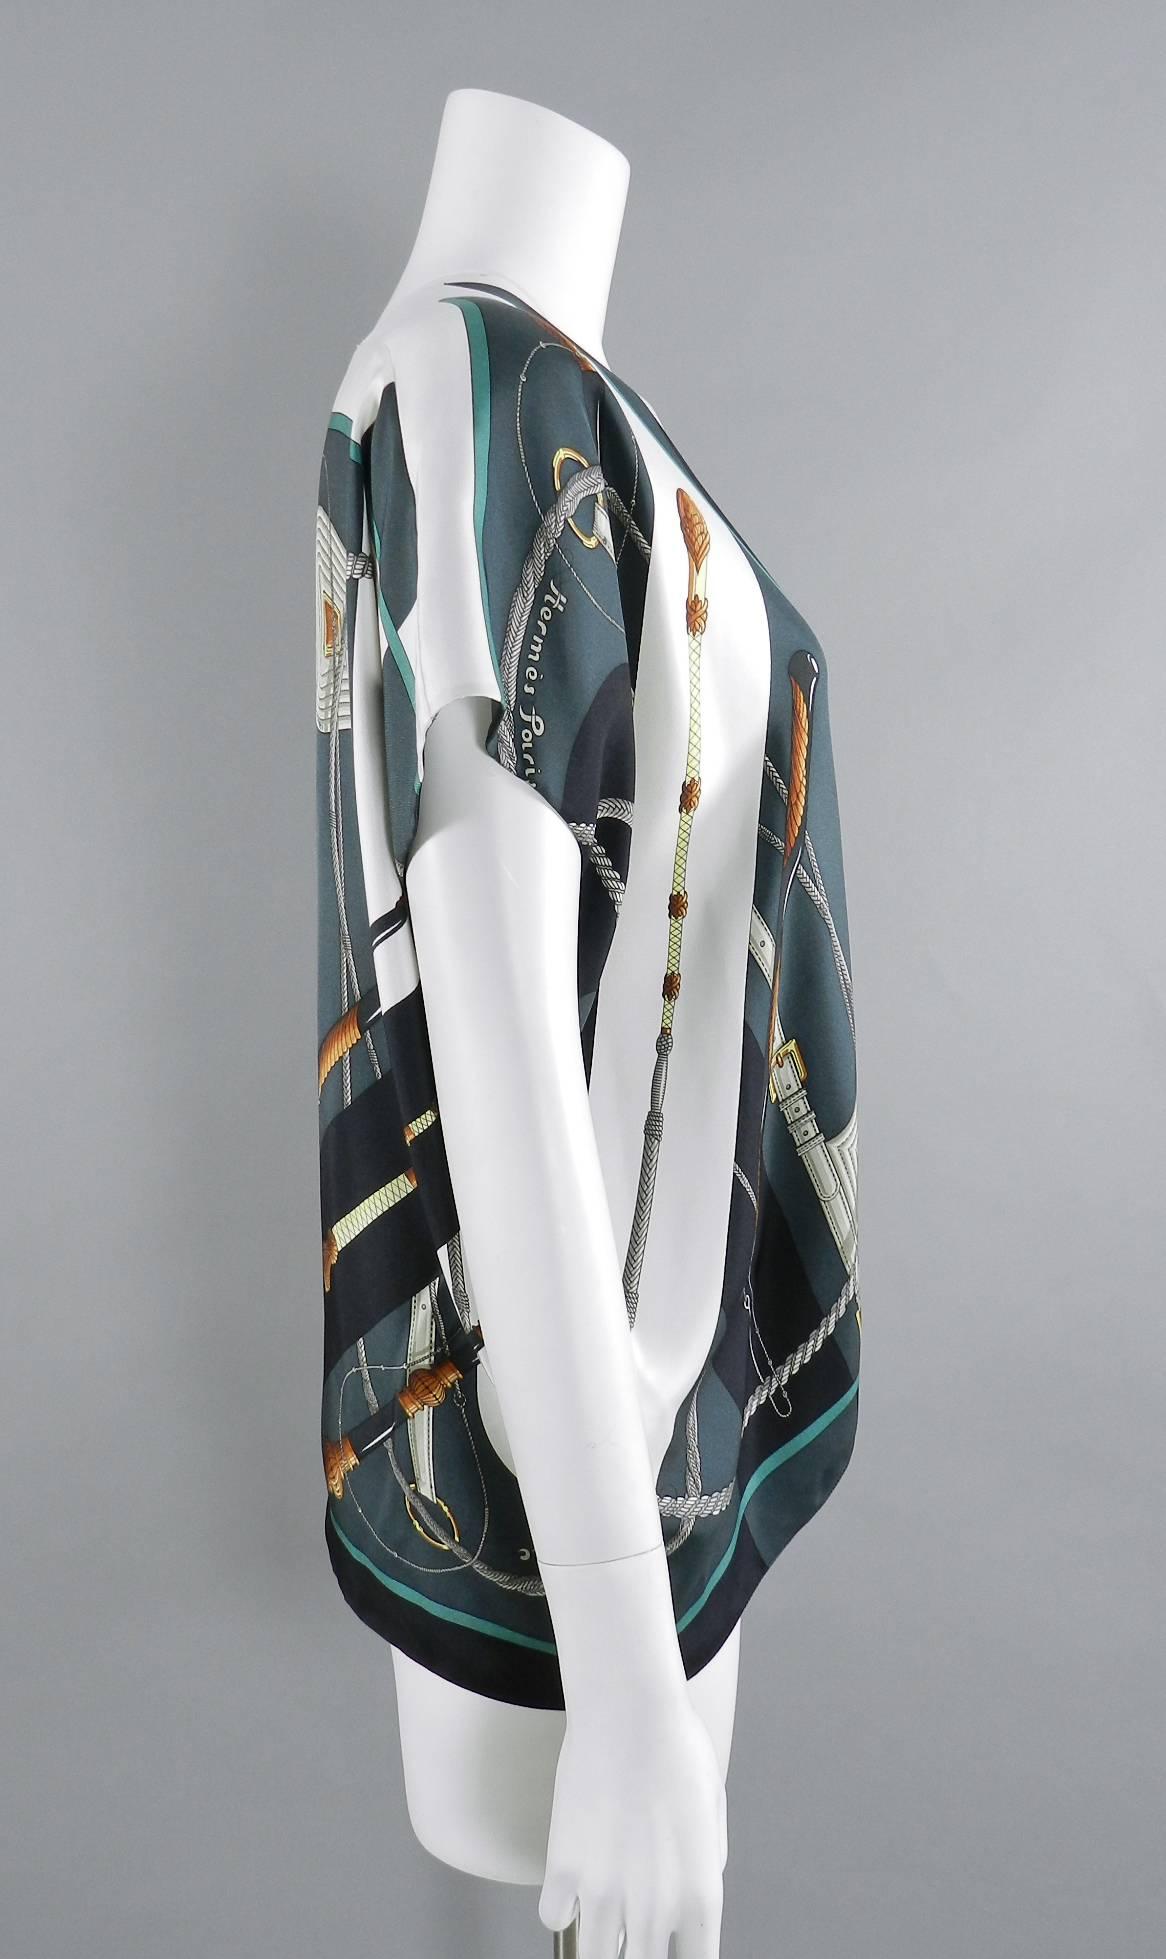 Hermes silk twill scarf top / shirt in dark green, black, and white.  Clic Clac design by Julia Abadie. Wrap style that fastens at front with a hidden button. Excellent clean, crisp pre-owned condition - worn once. Marked 